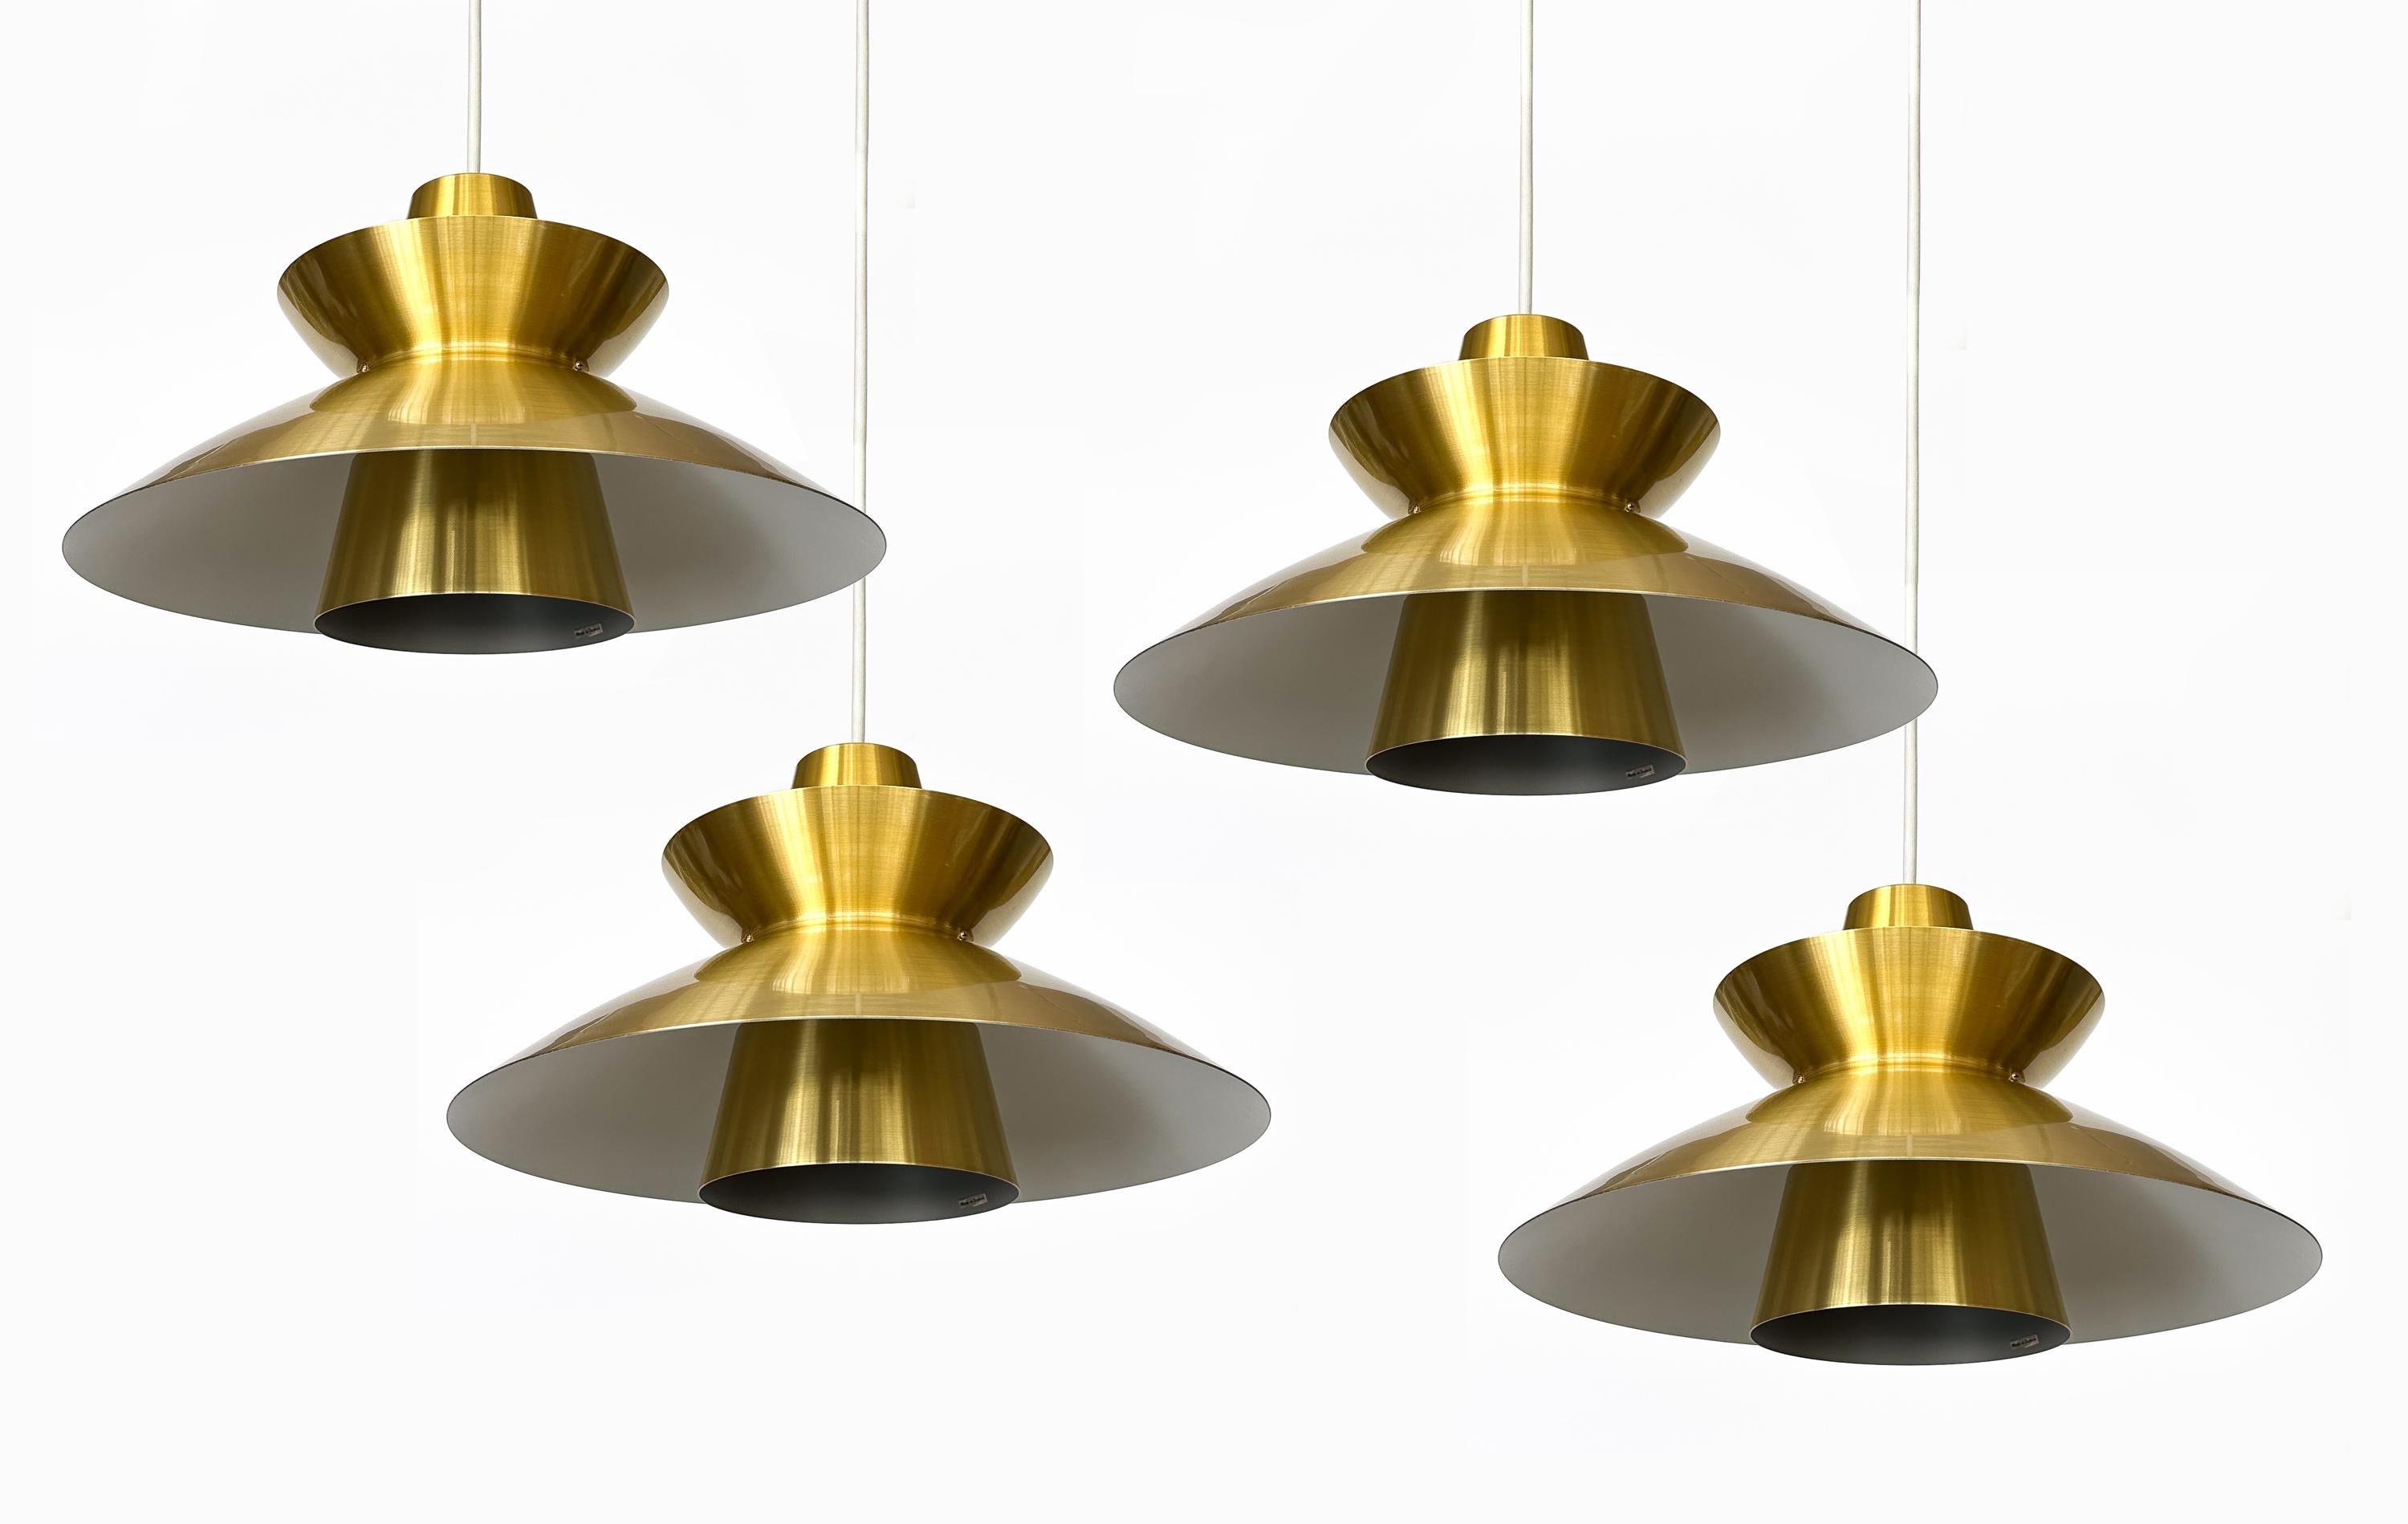 Illuminate your space with a piece of design history—a vintage modern brass “Navy” pendant light, designed by none other than the legendary Jørn Utzon, the mastermind behind the iconic Sydney Opera House. Manufactured by Nordisk Solar in Denmark